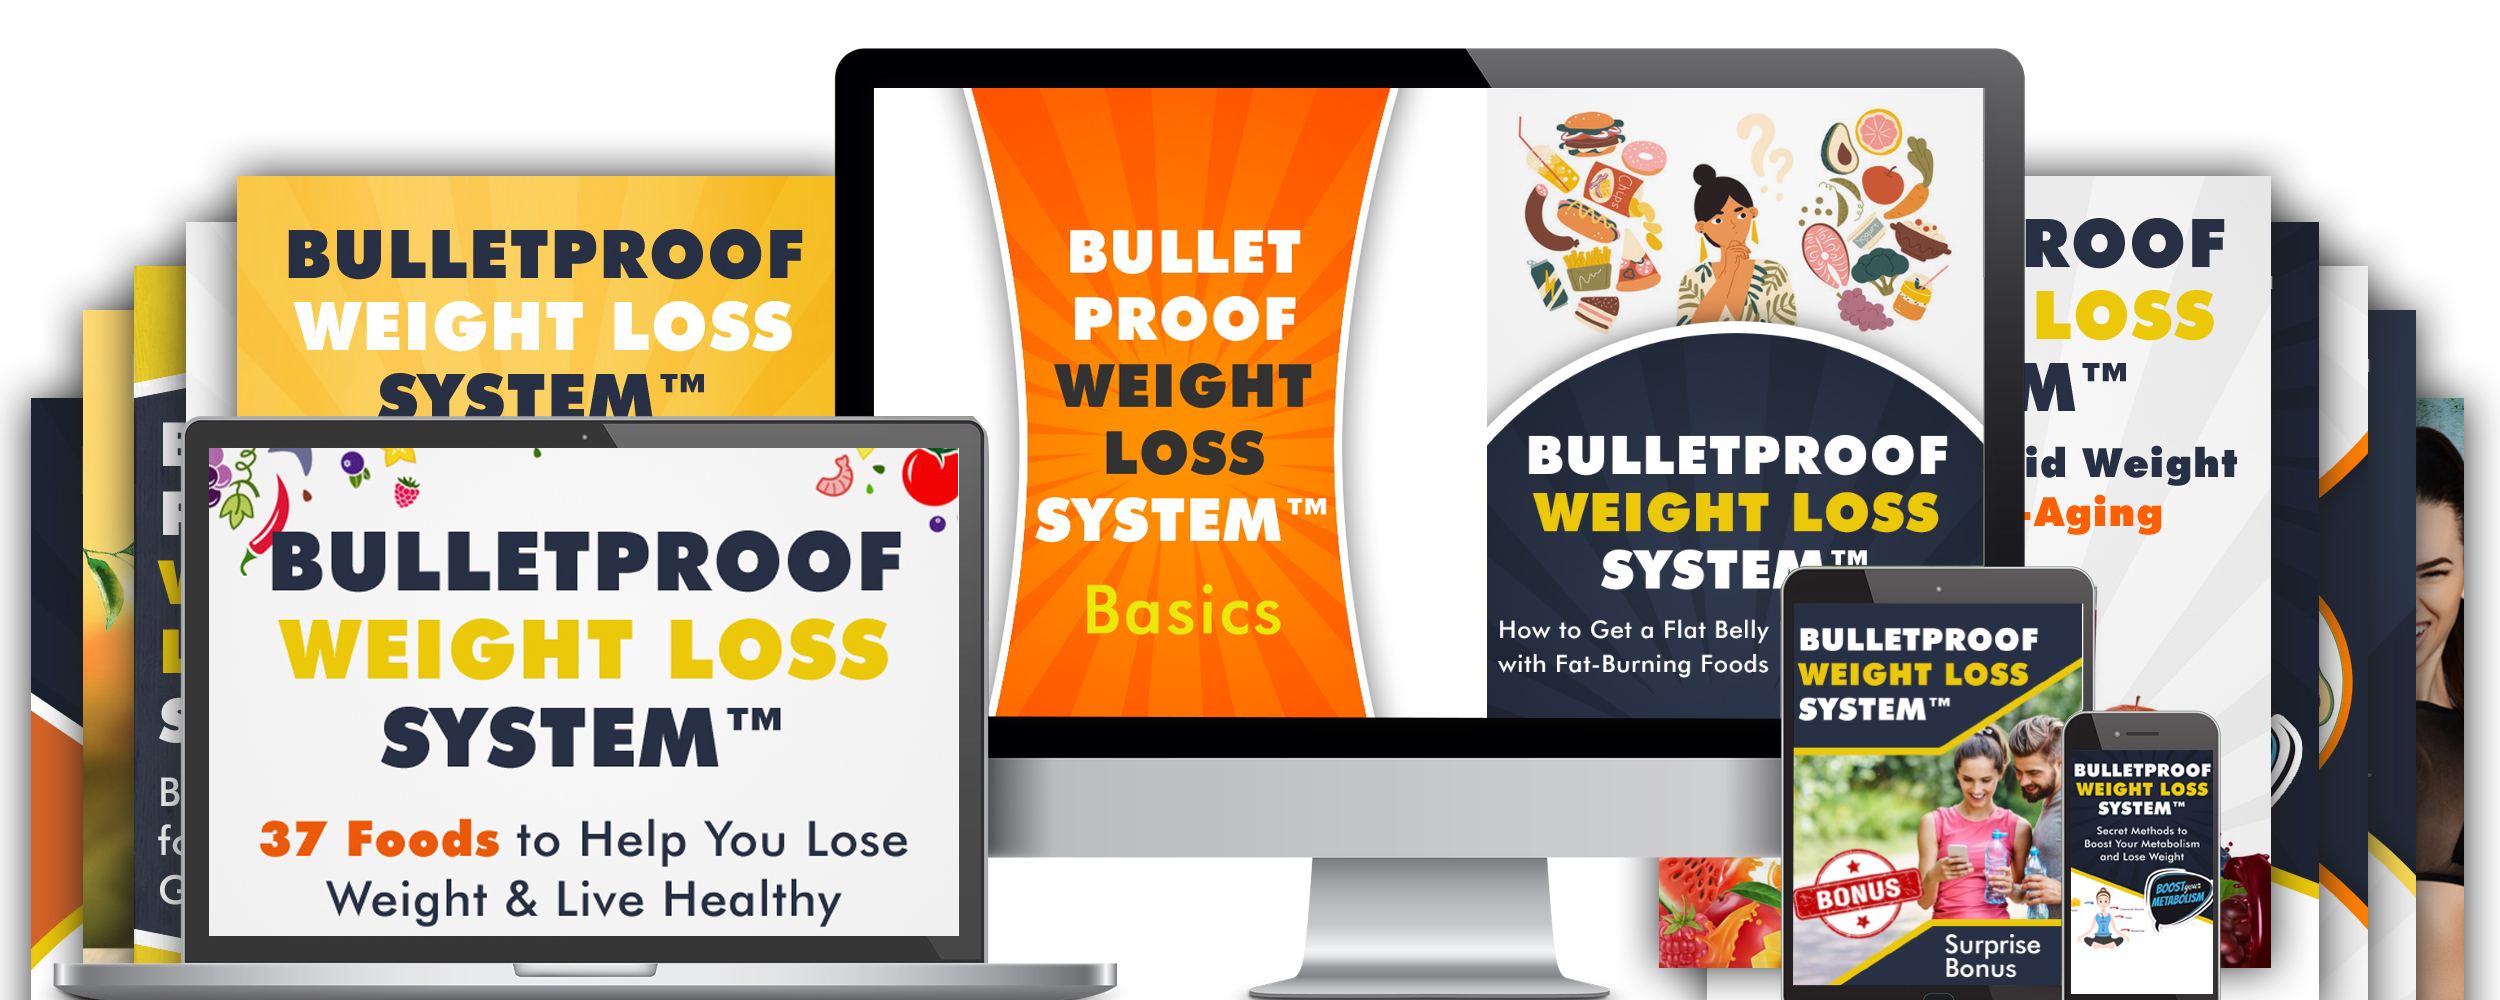 Bulletproof Weight Loss System™